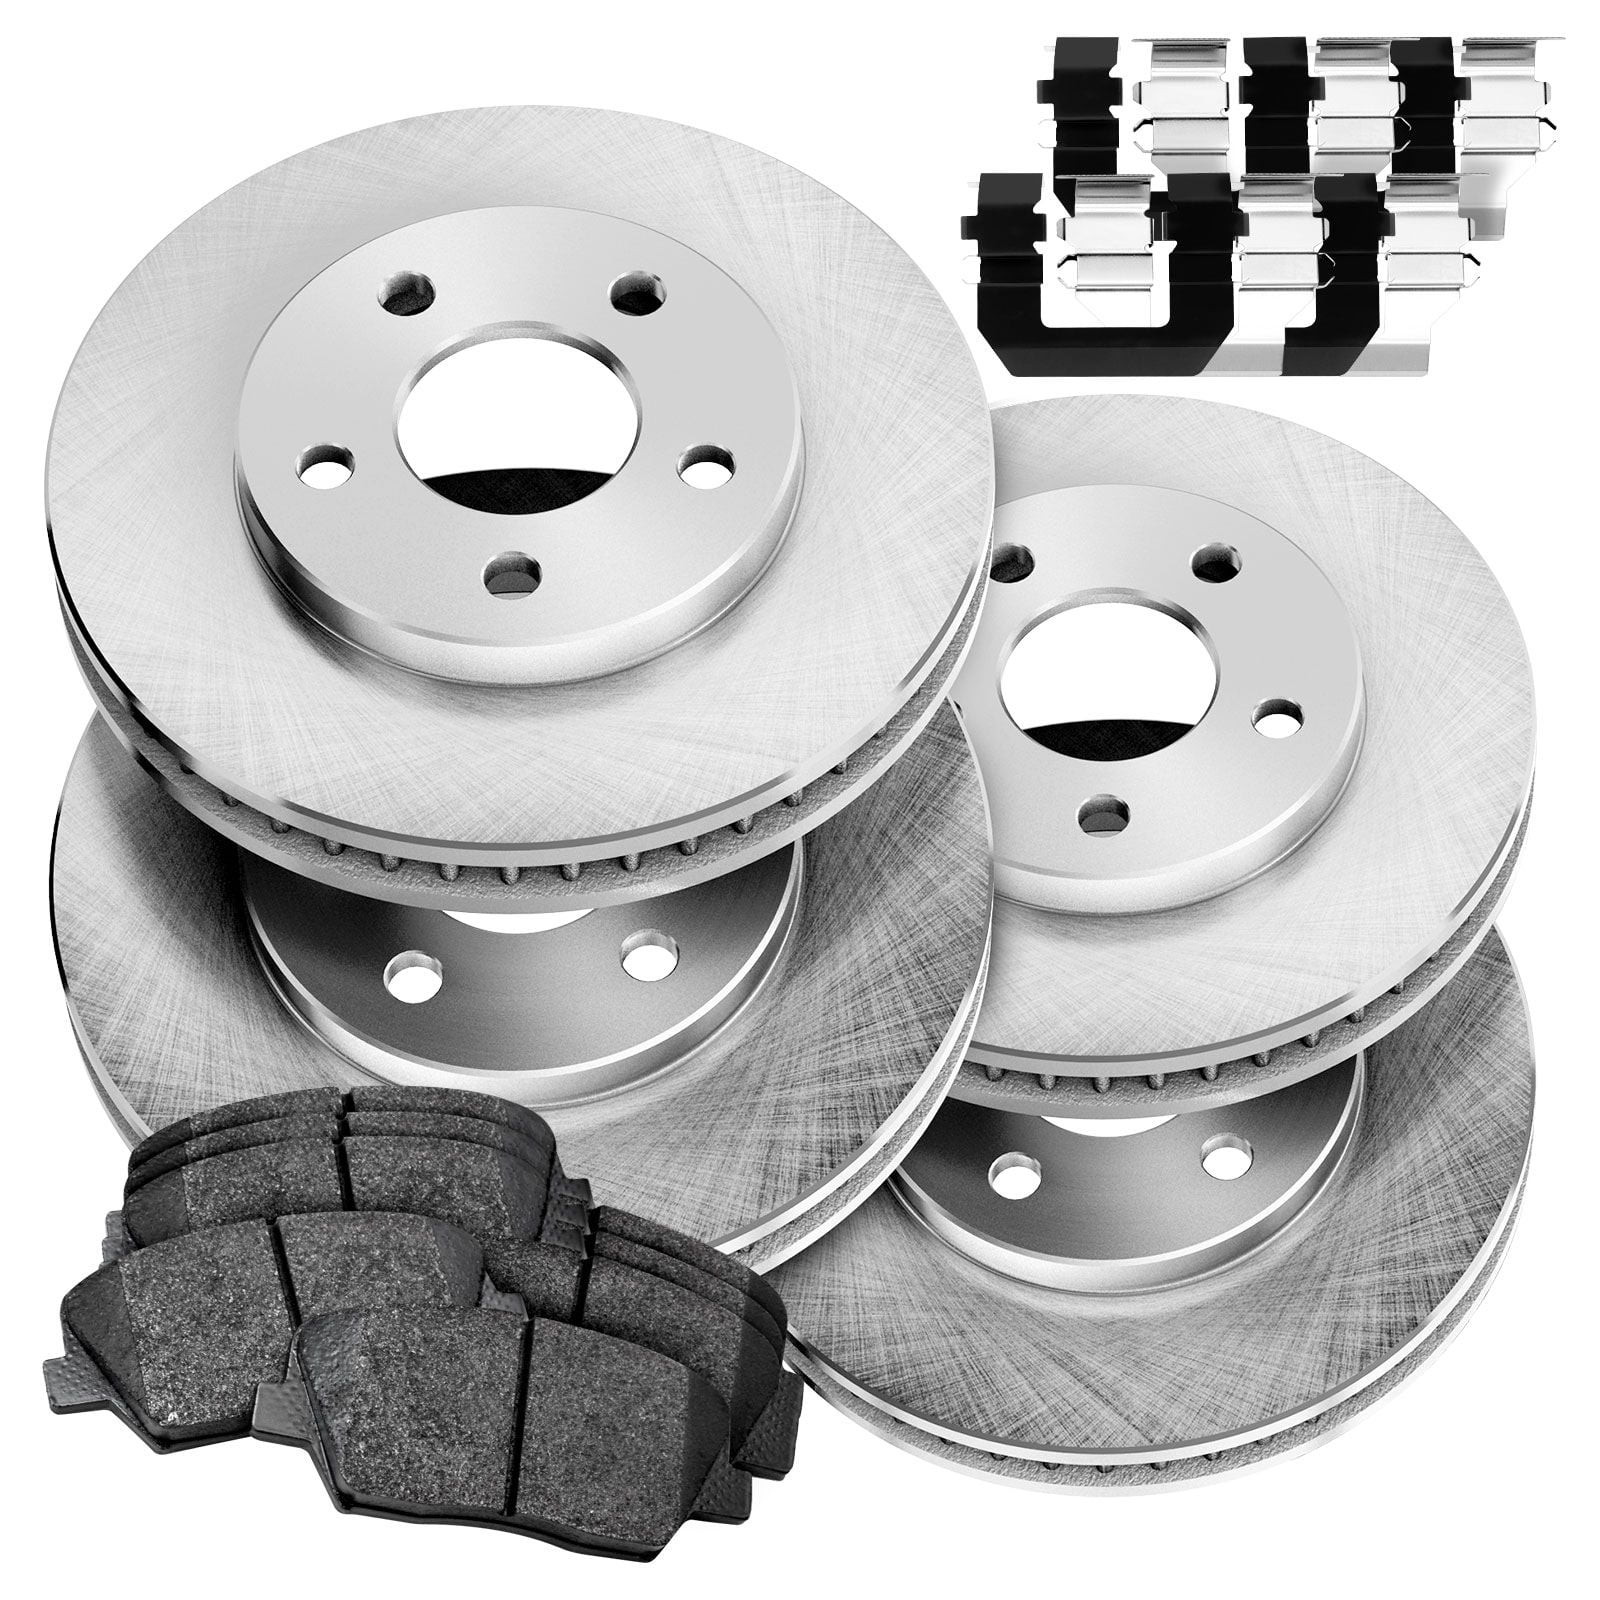 Front+Rear Kit 4 OEM Replacement Disc Brake Rotors High-End 8 Semi-Metallic Pads Fits:- Jeep 5lug